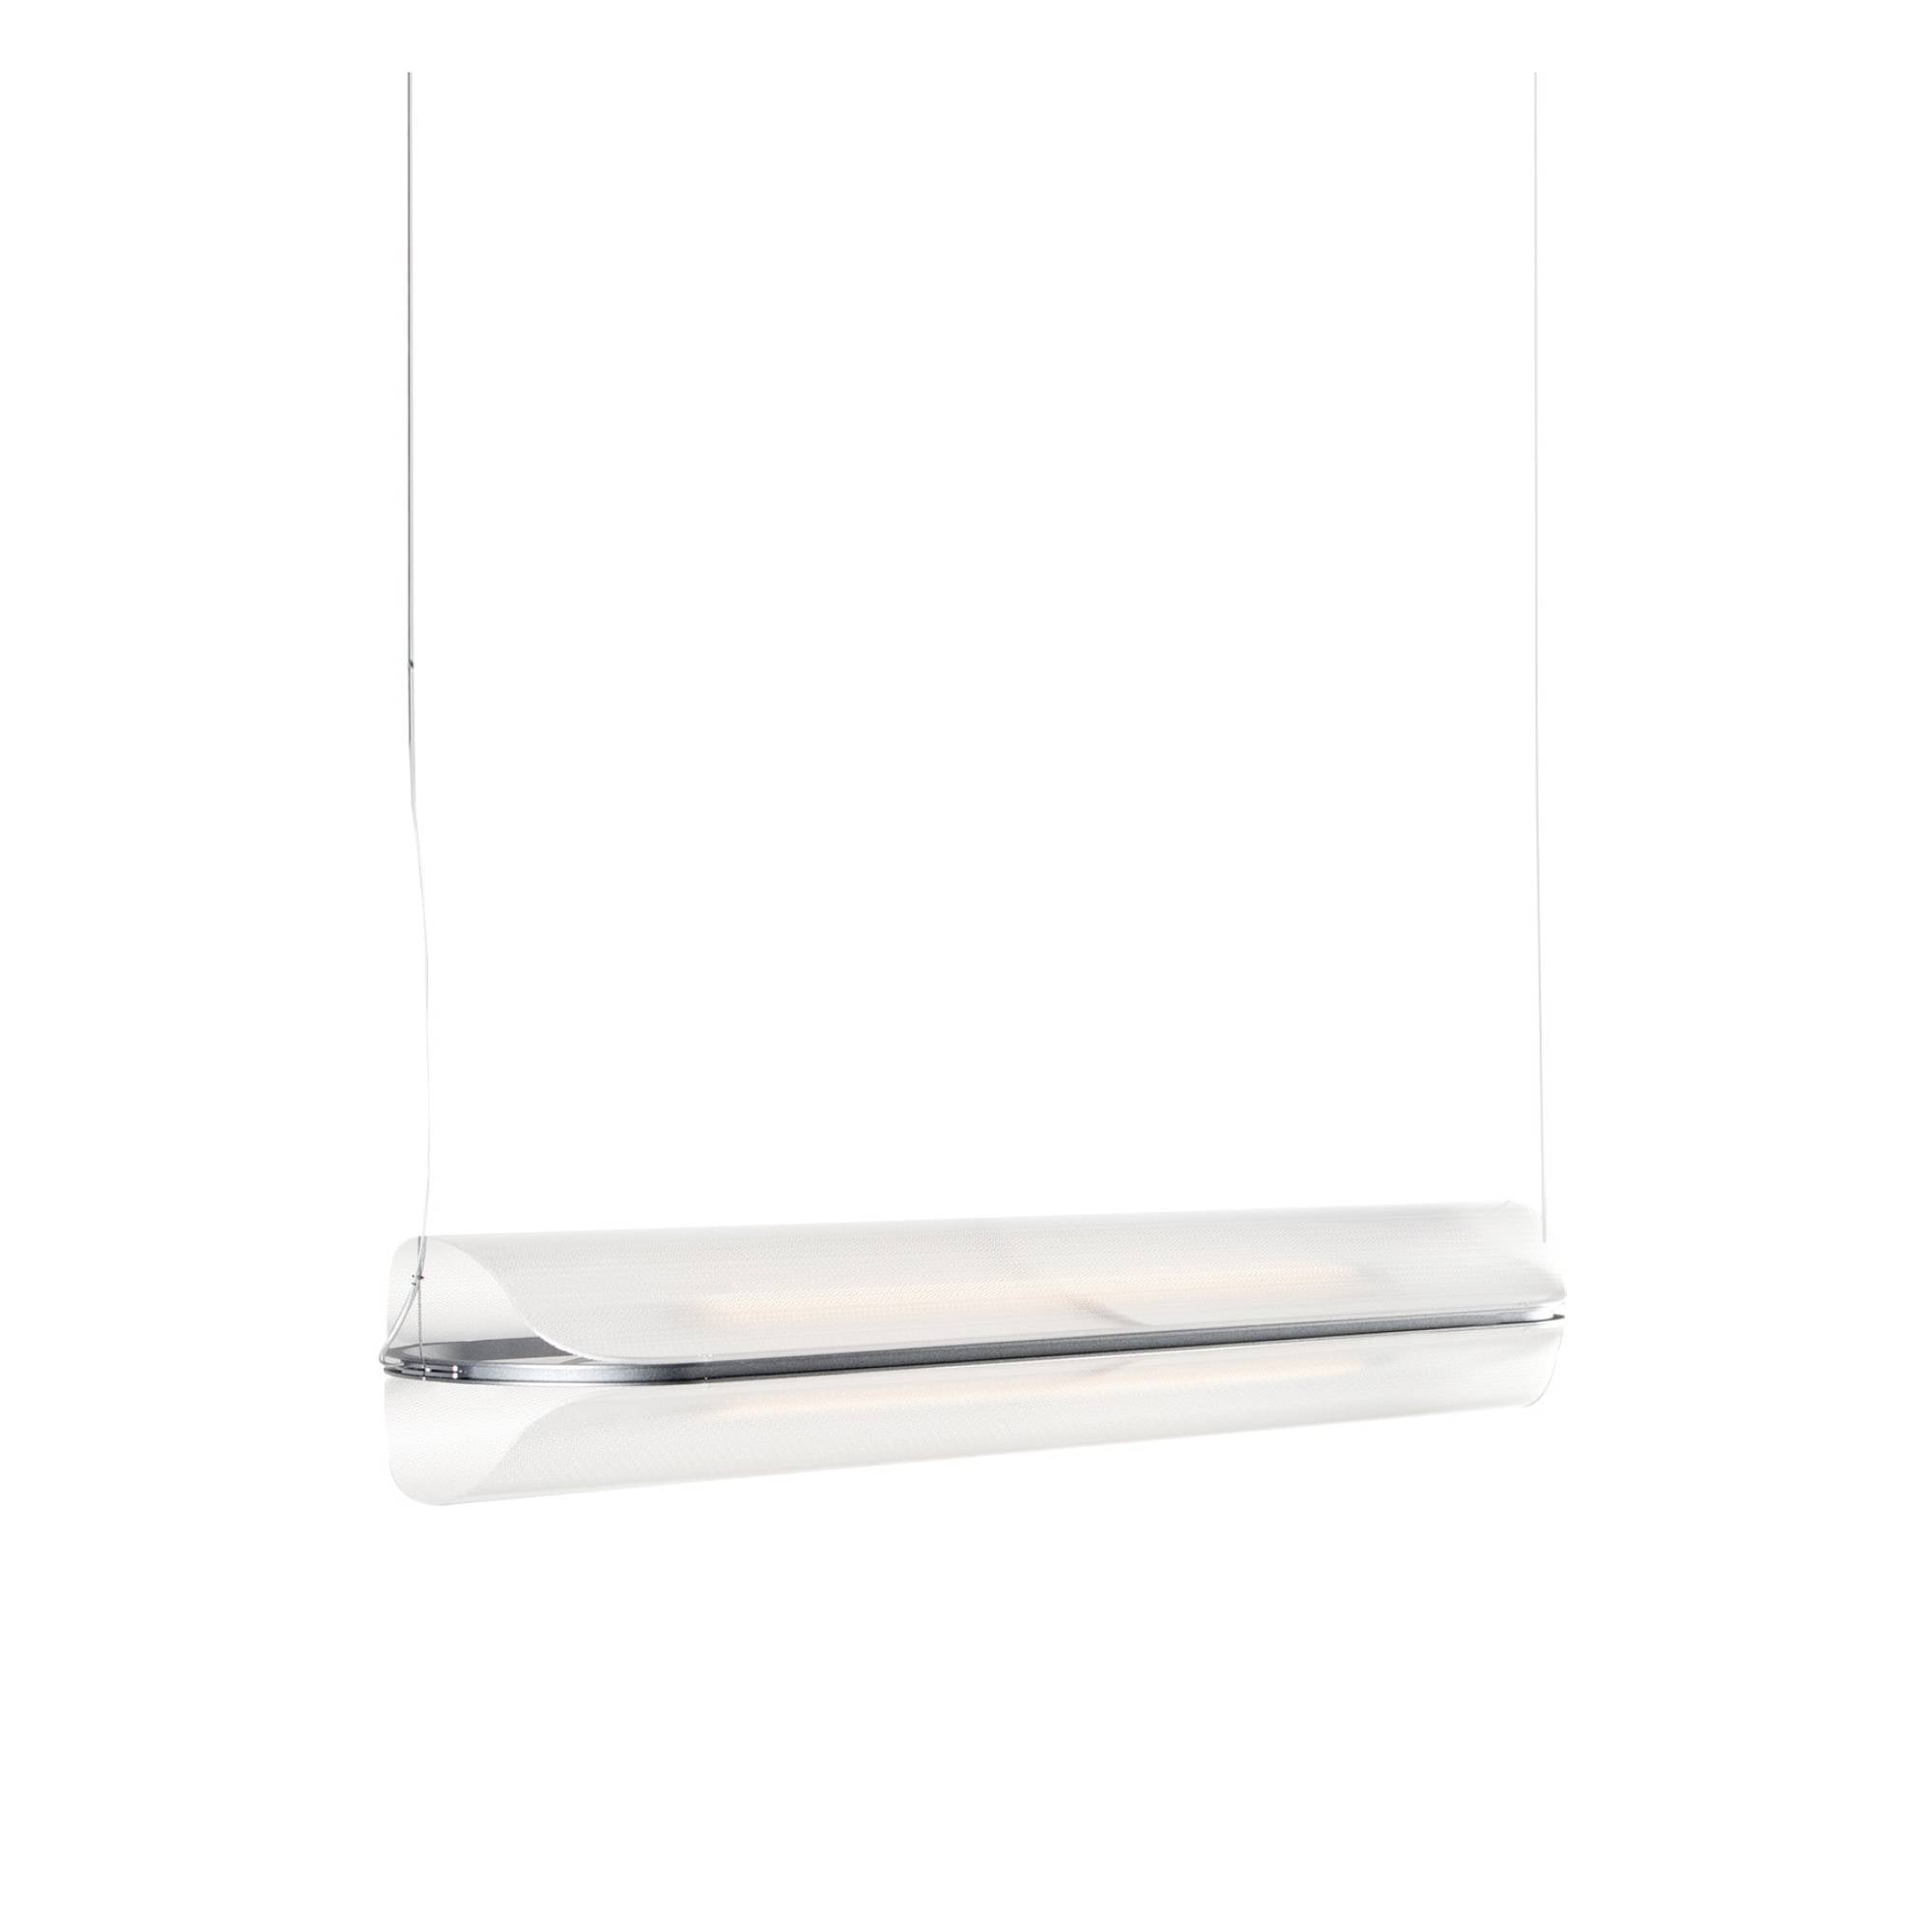 Vale System X-Axis Pendant Light: Horizontal + Side-to-Side + Vale 1